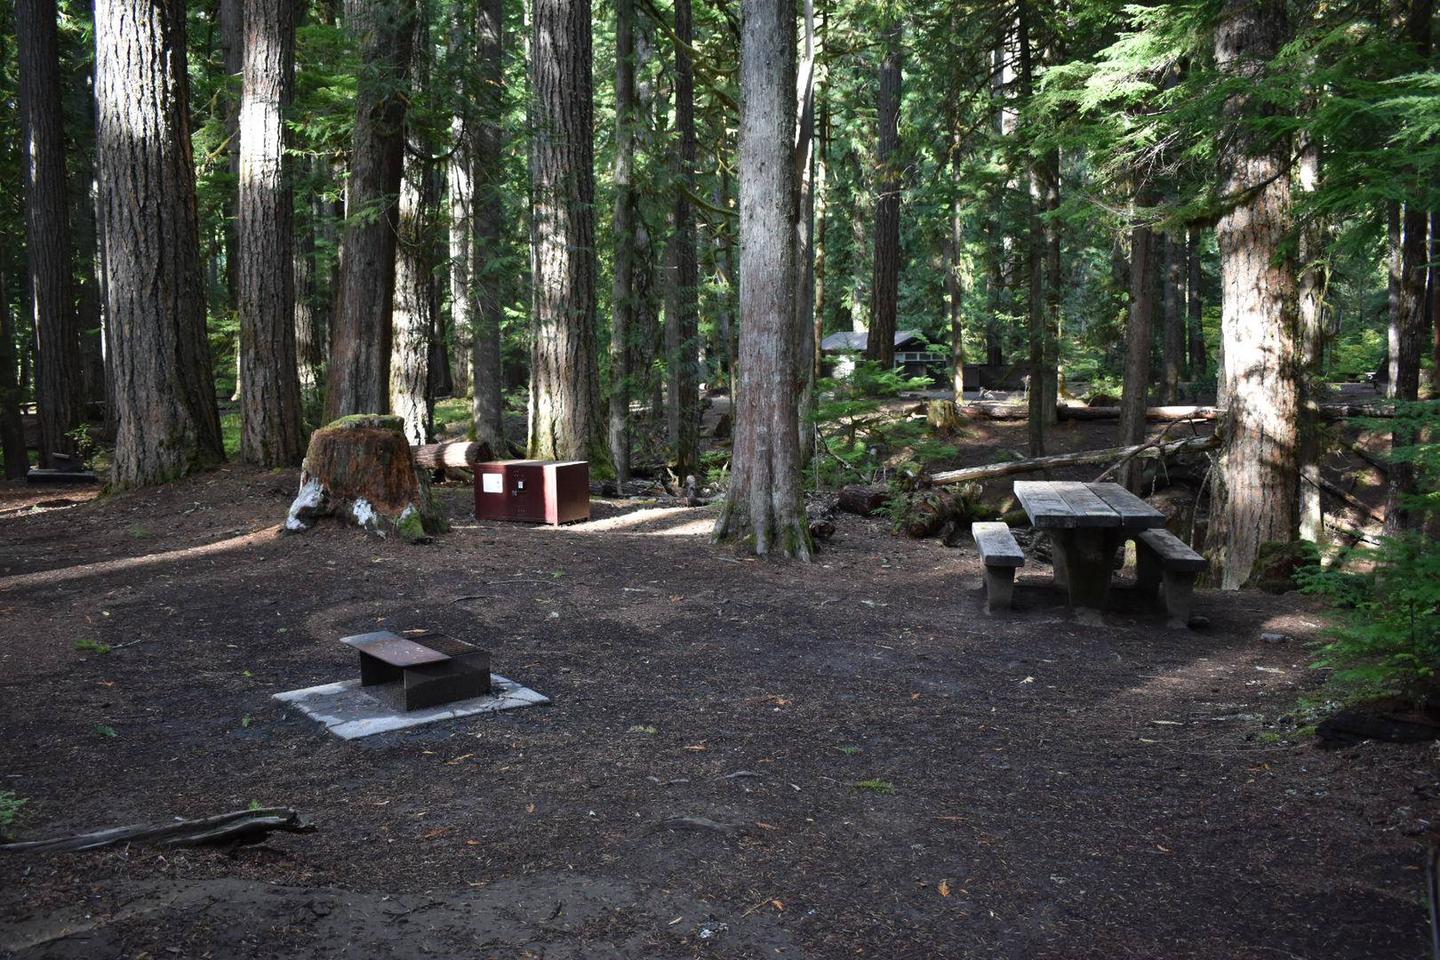 Campers are provided with a picnic table, food storage box, and fire pit.